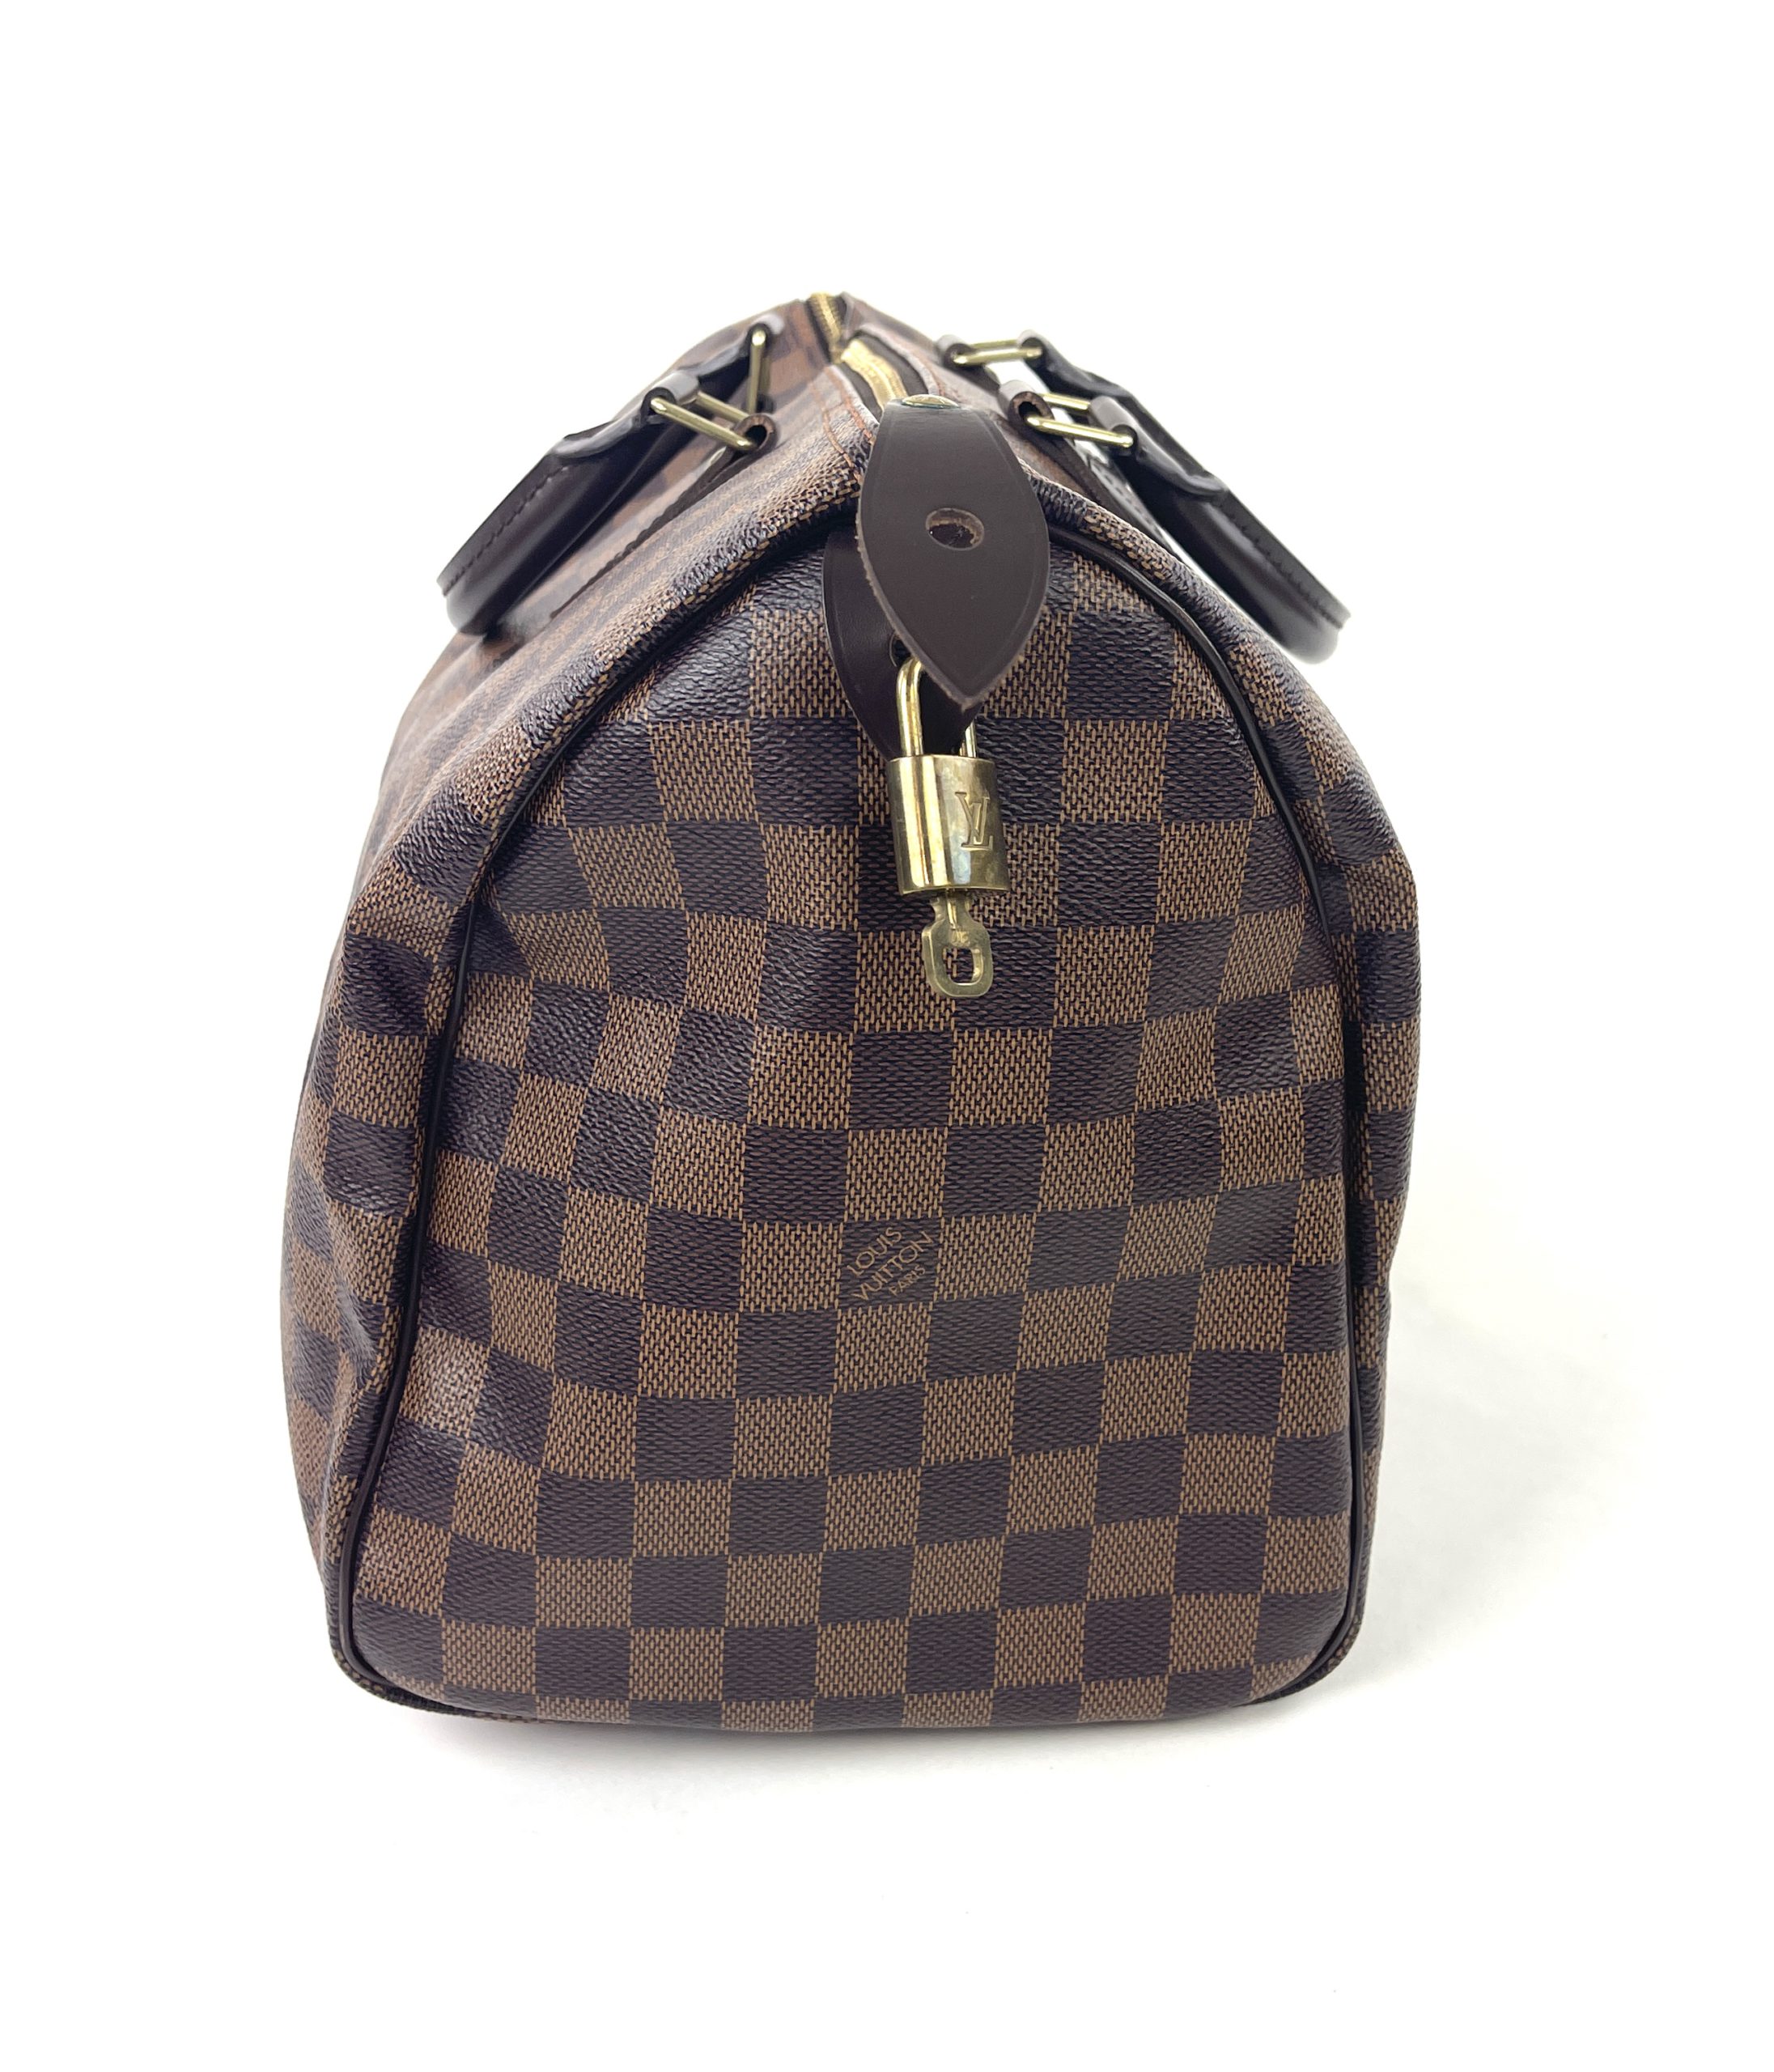 Your daily dose of elegance: the Louis Vuitton Damier Ebene Speedy